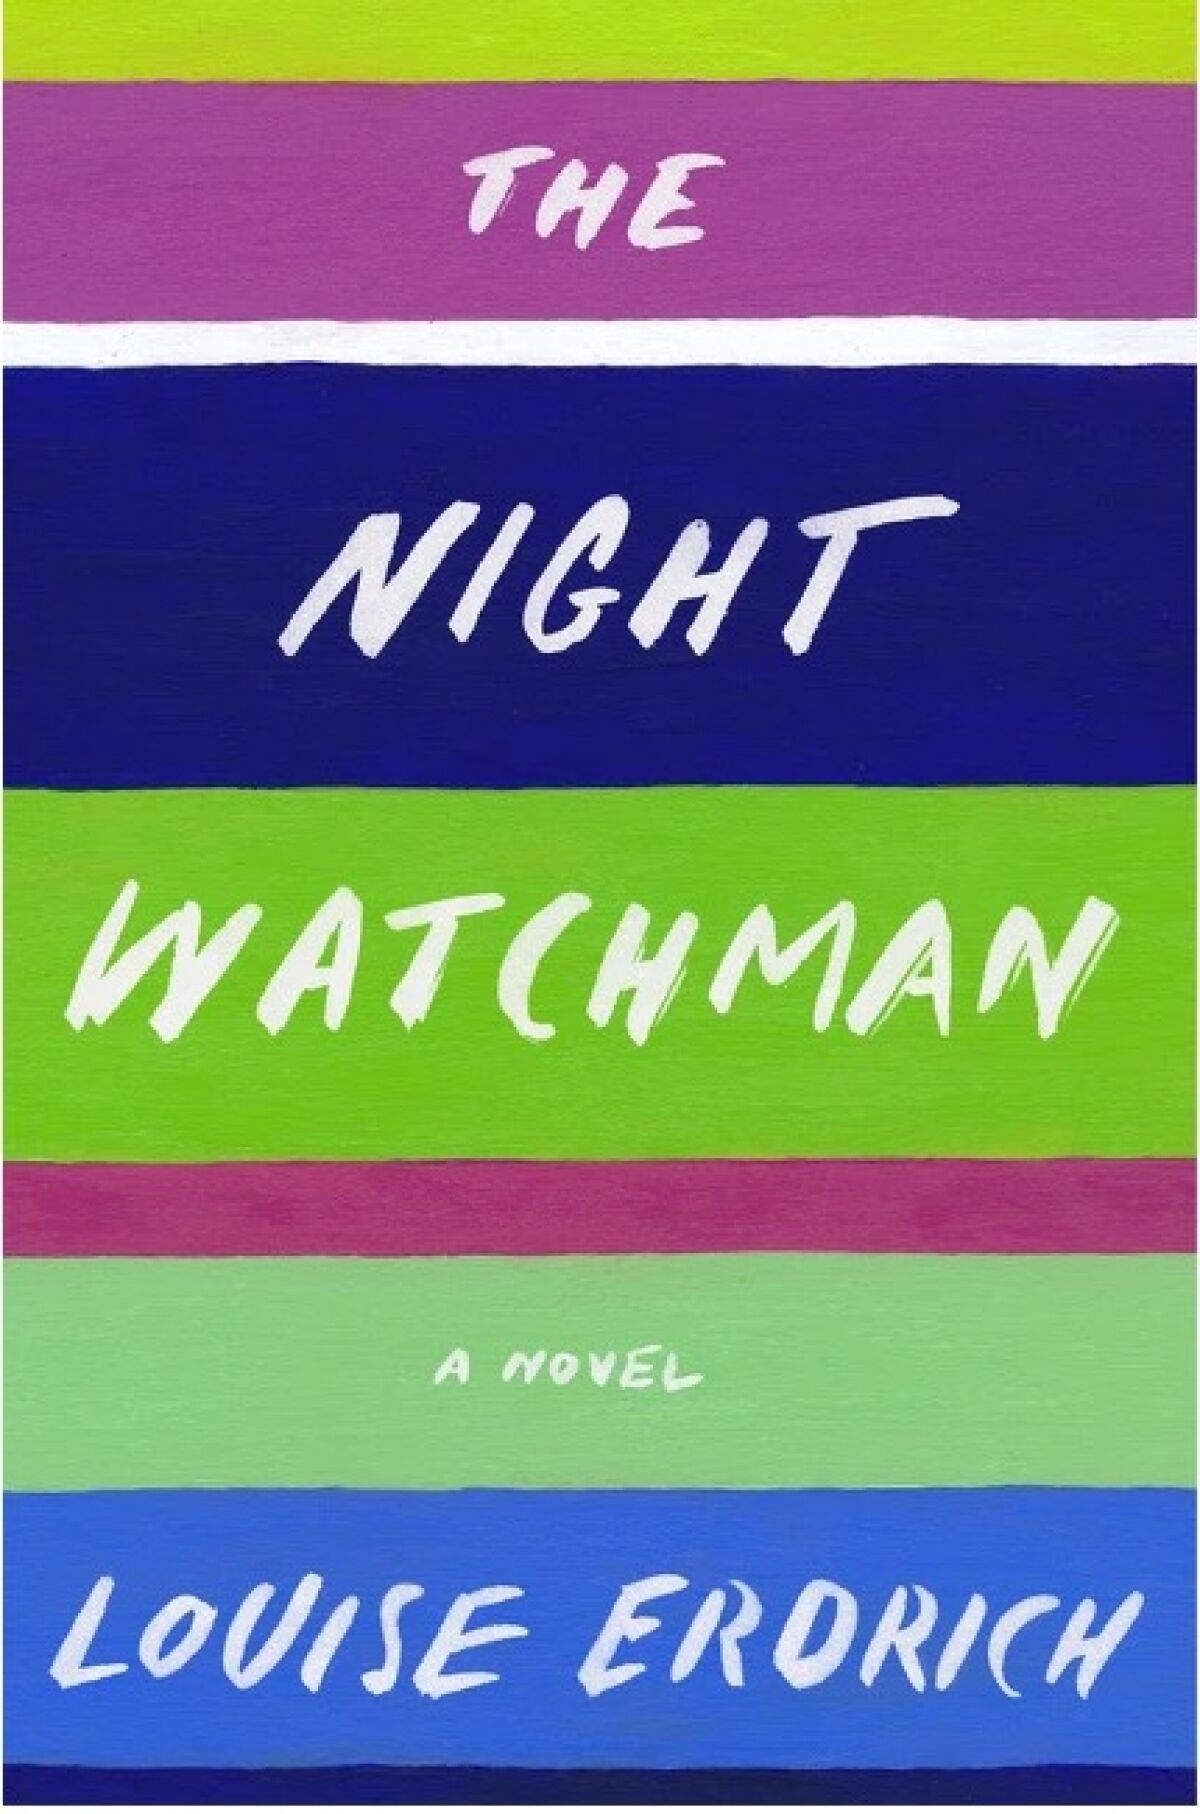 "The Night Watchman" by Louise Erdrich